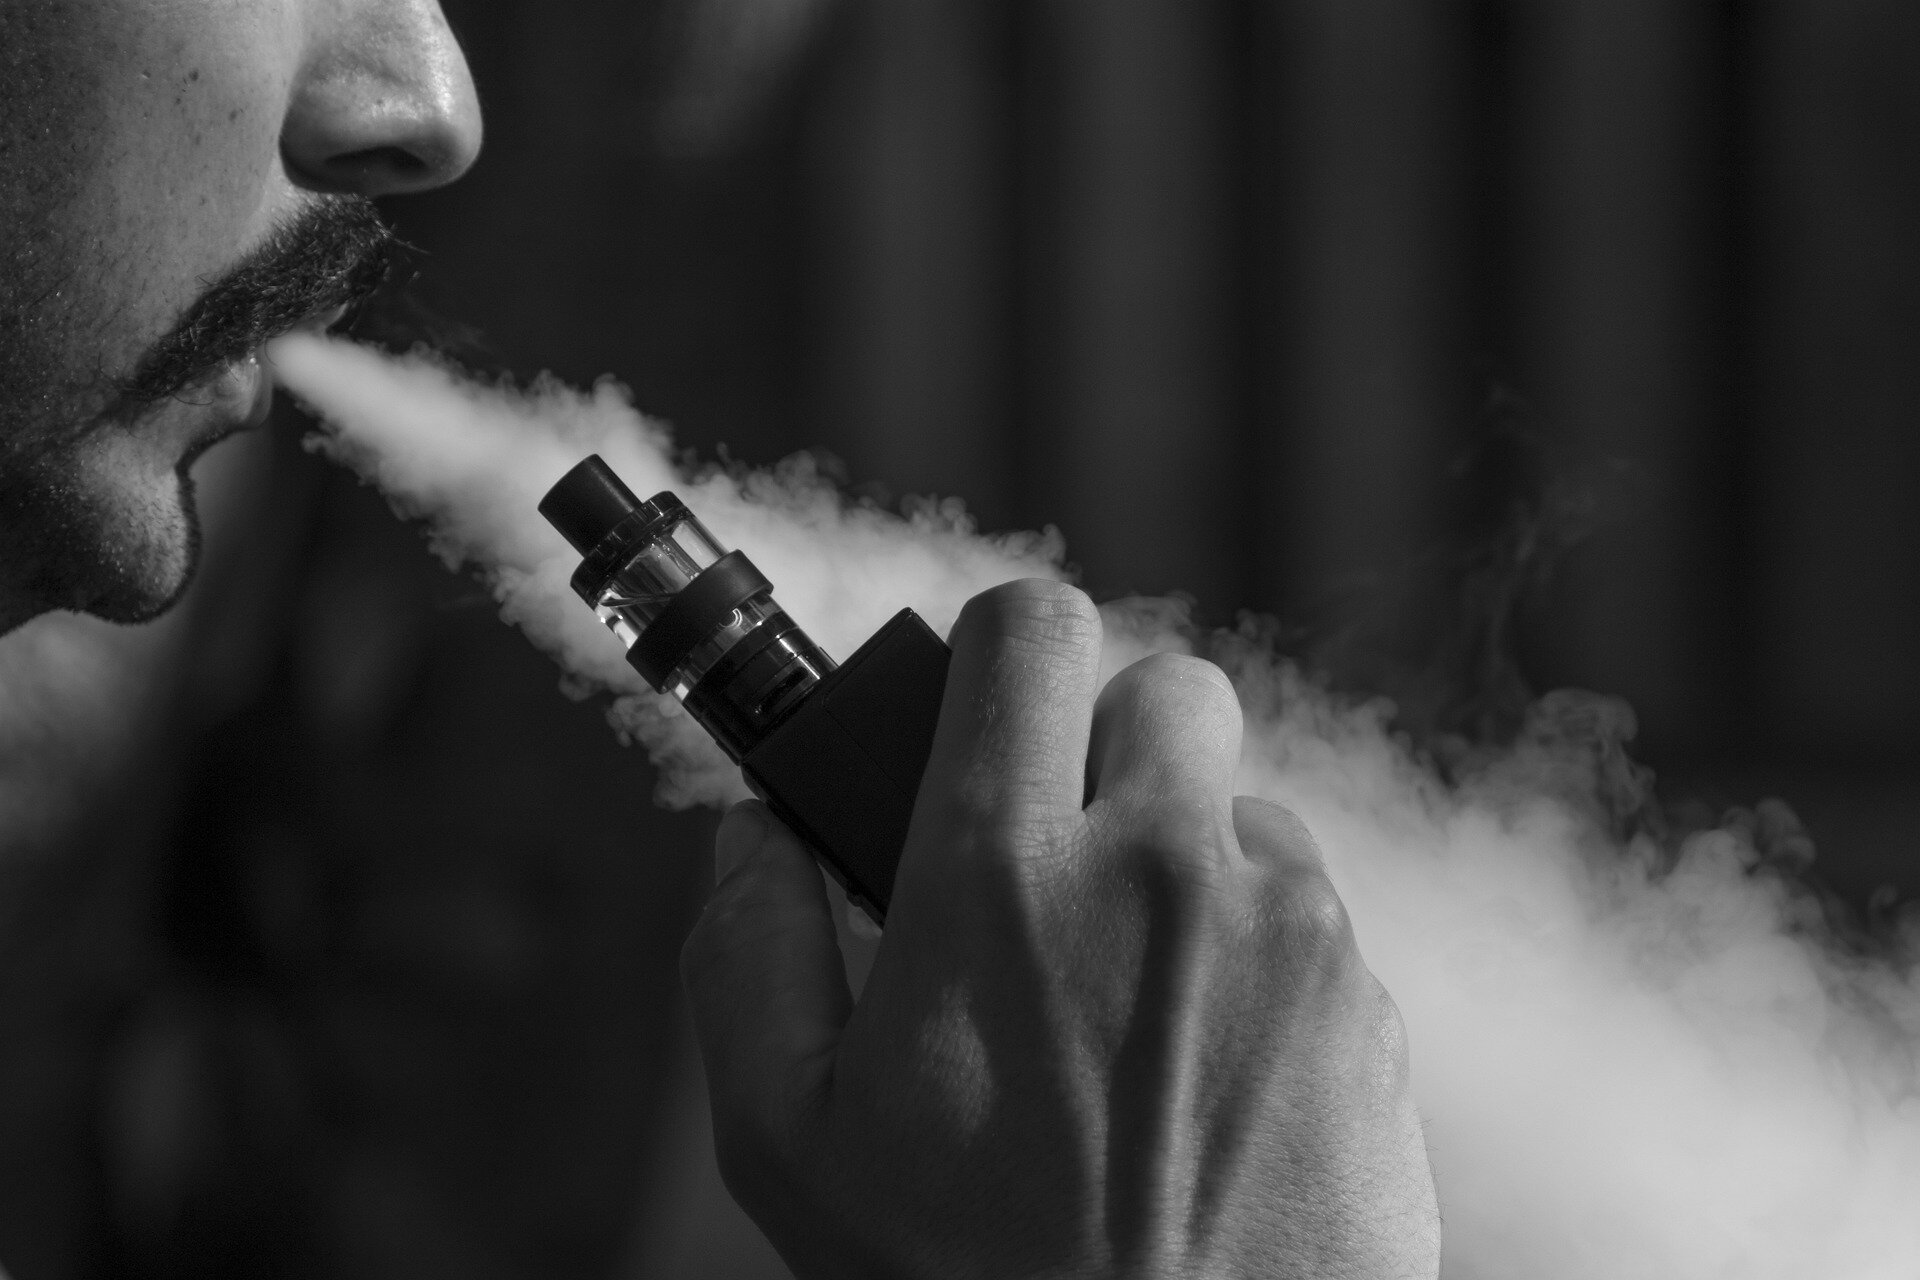 DNA Damage Levels Similar in Vapers and Smokers